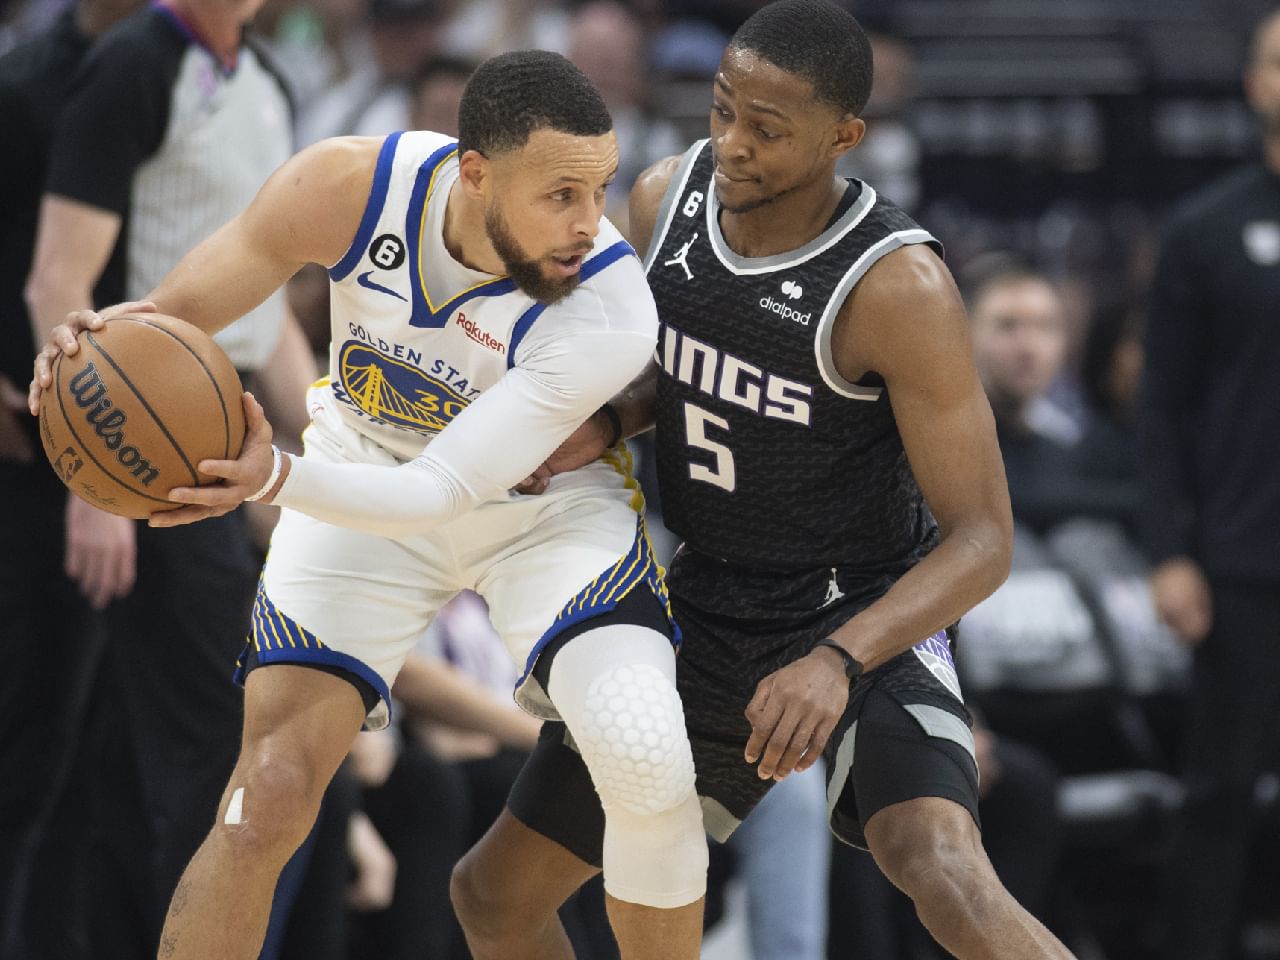 NBA: Fox outshines Curry as Kings edge Warriors to end 16-year playoff drought